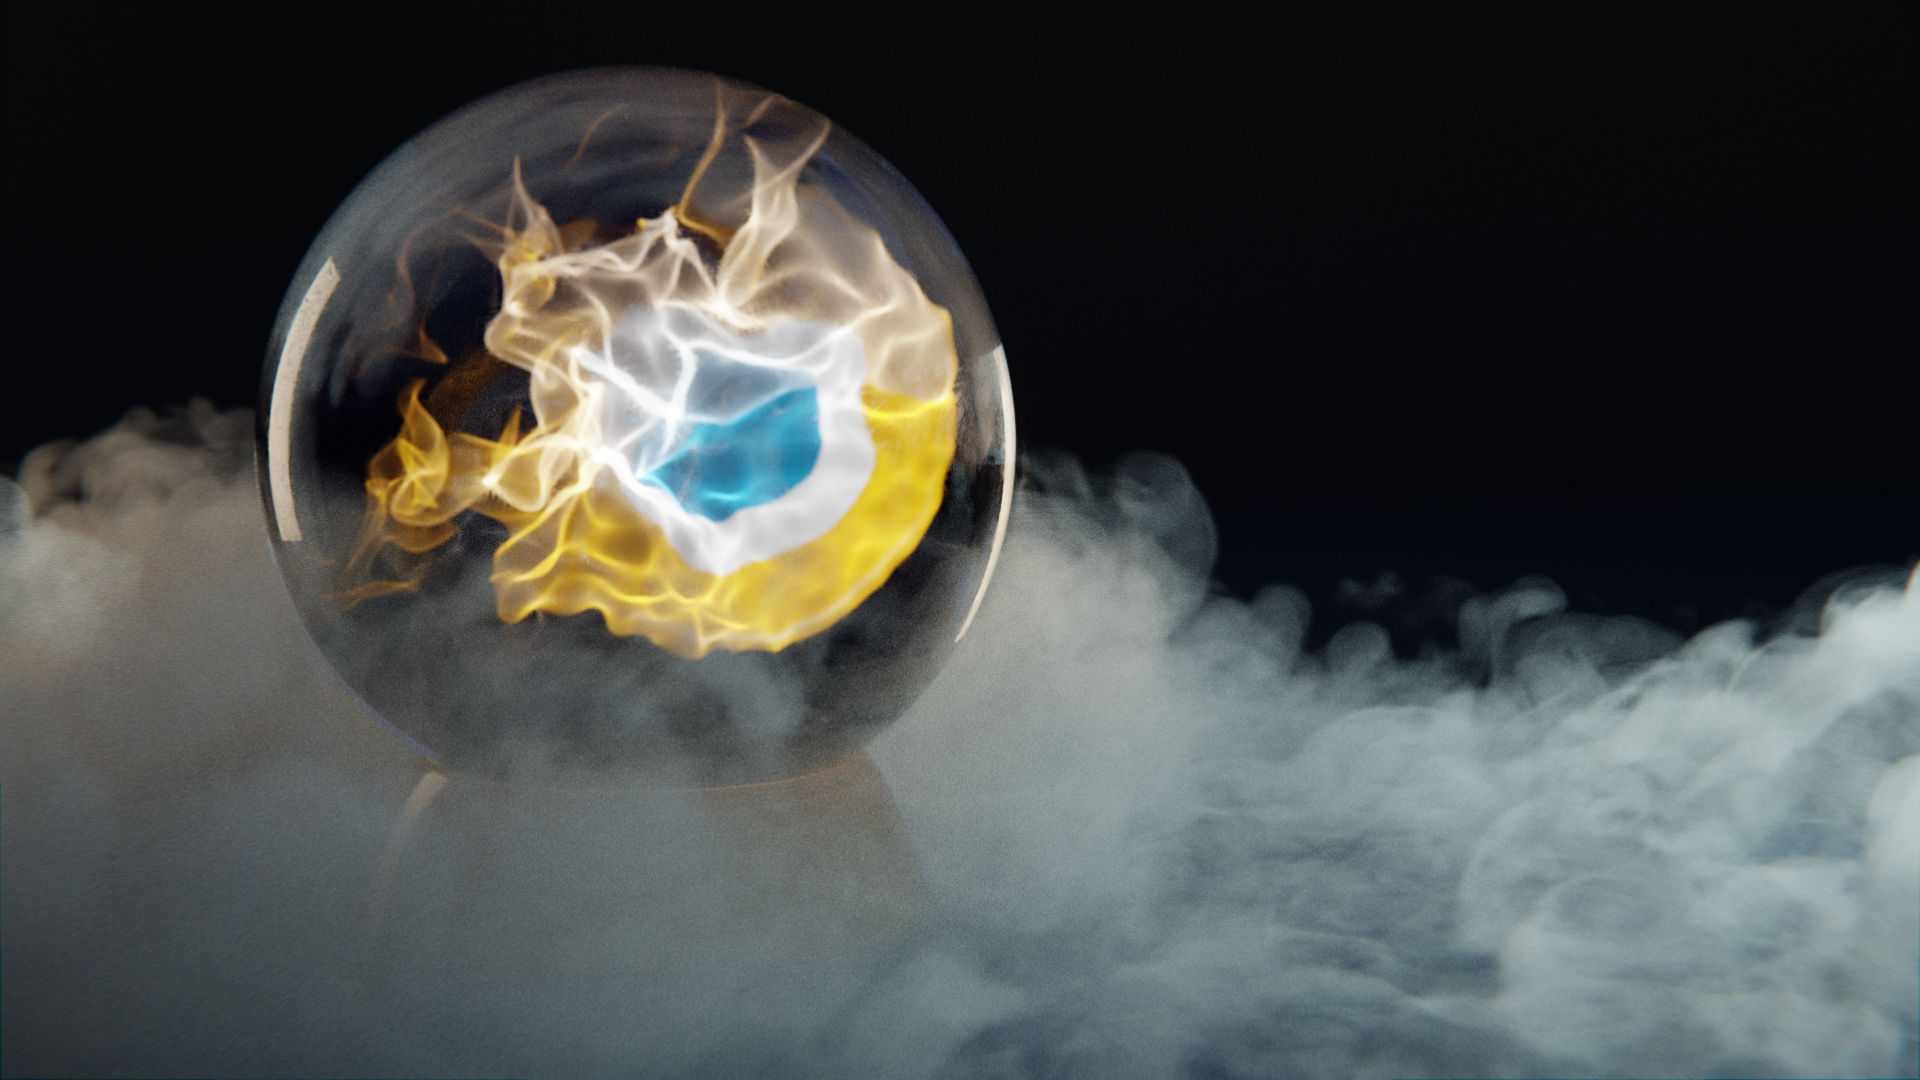 Look into the future of CGI with the glassball demo file for the burner template.